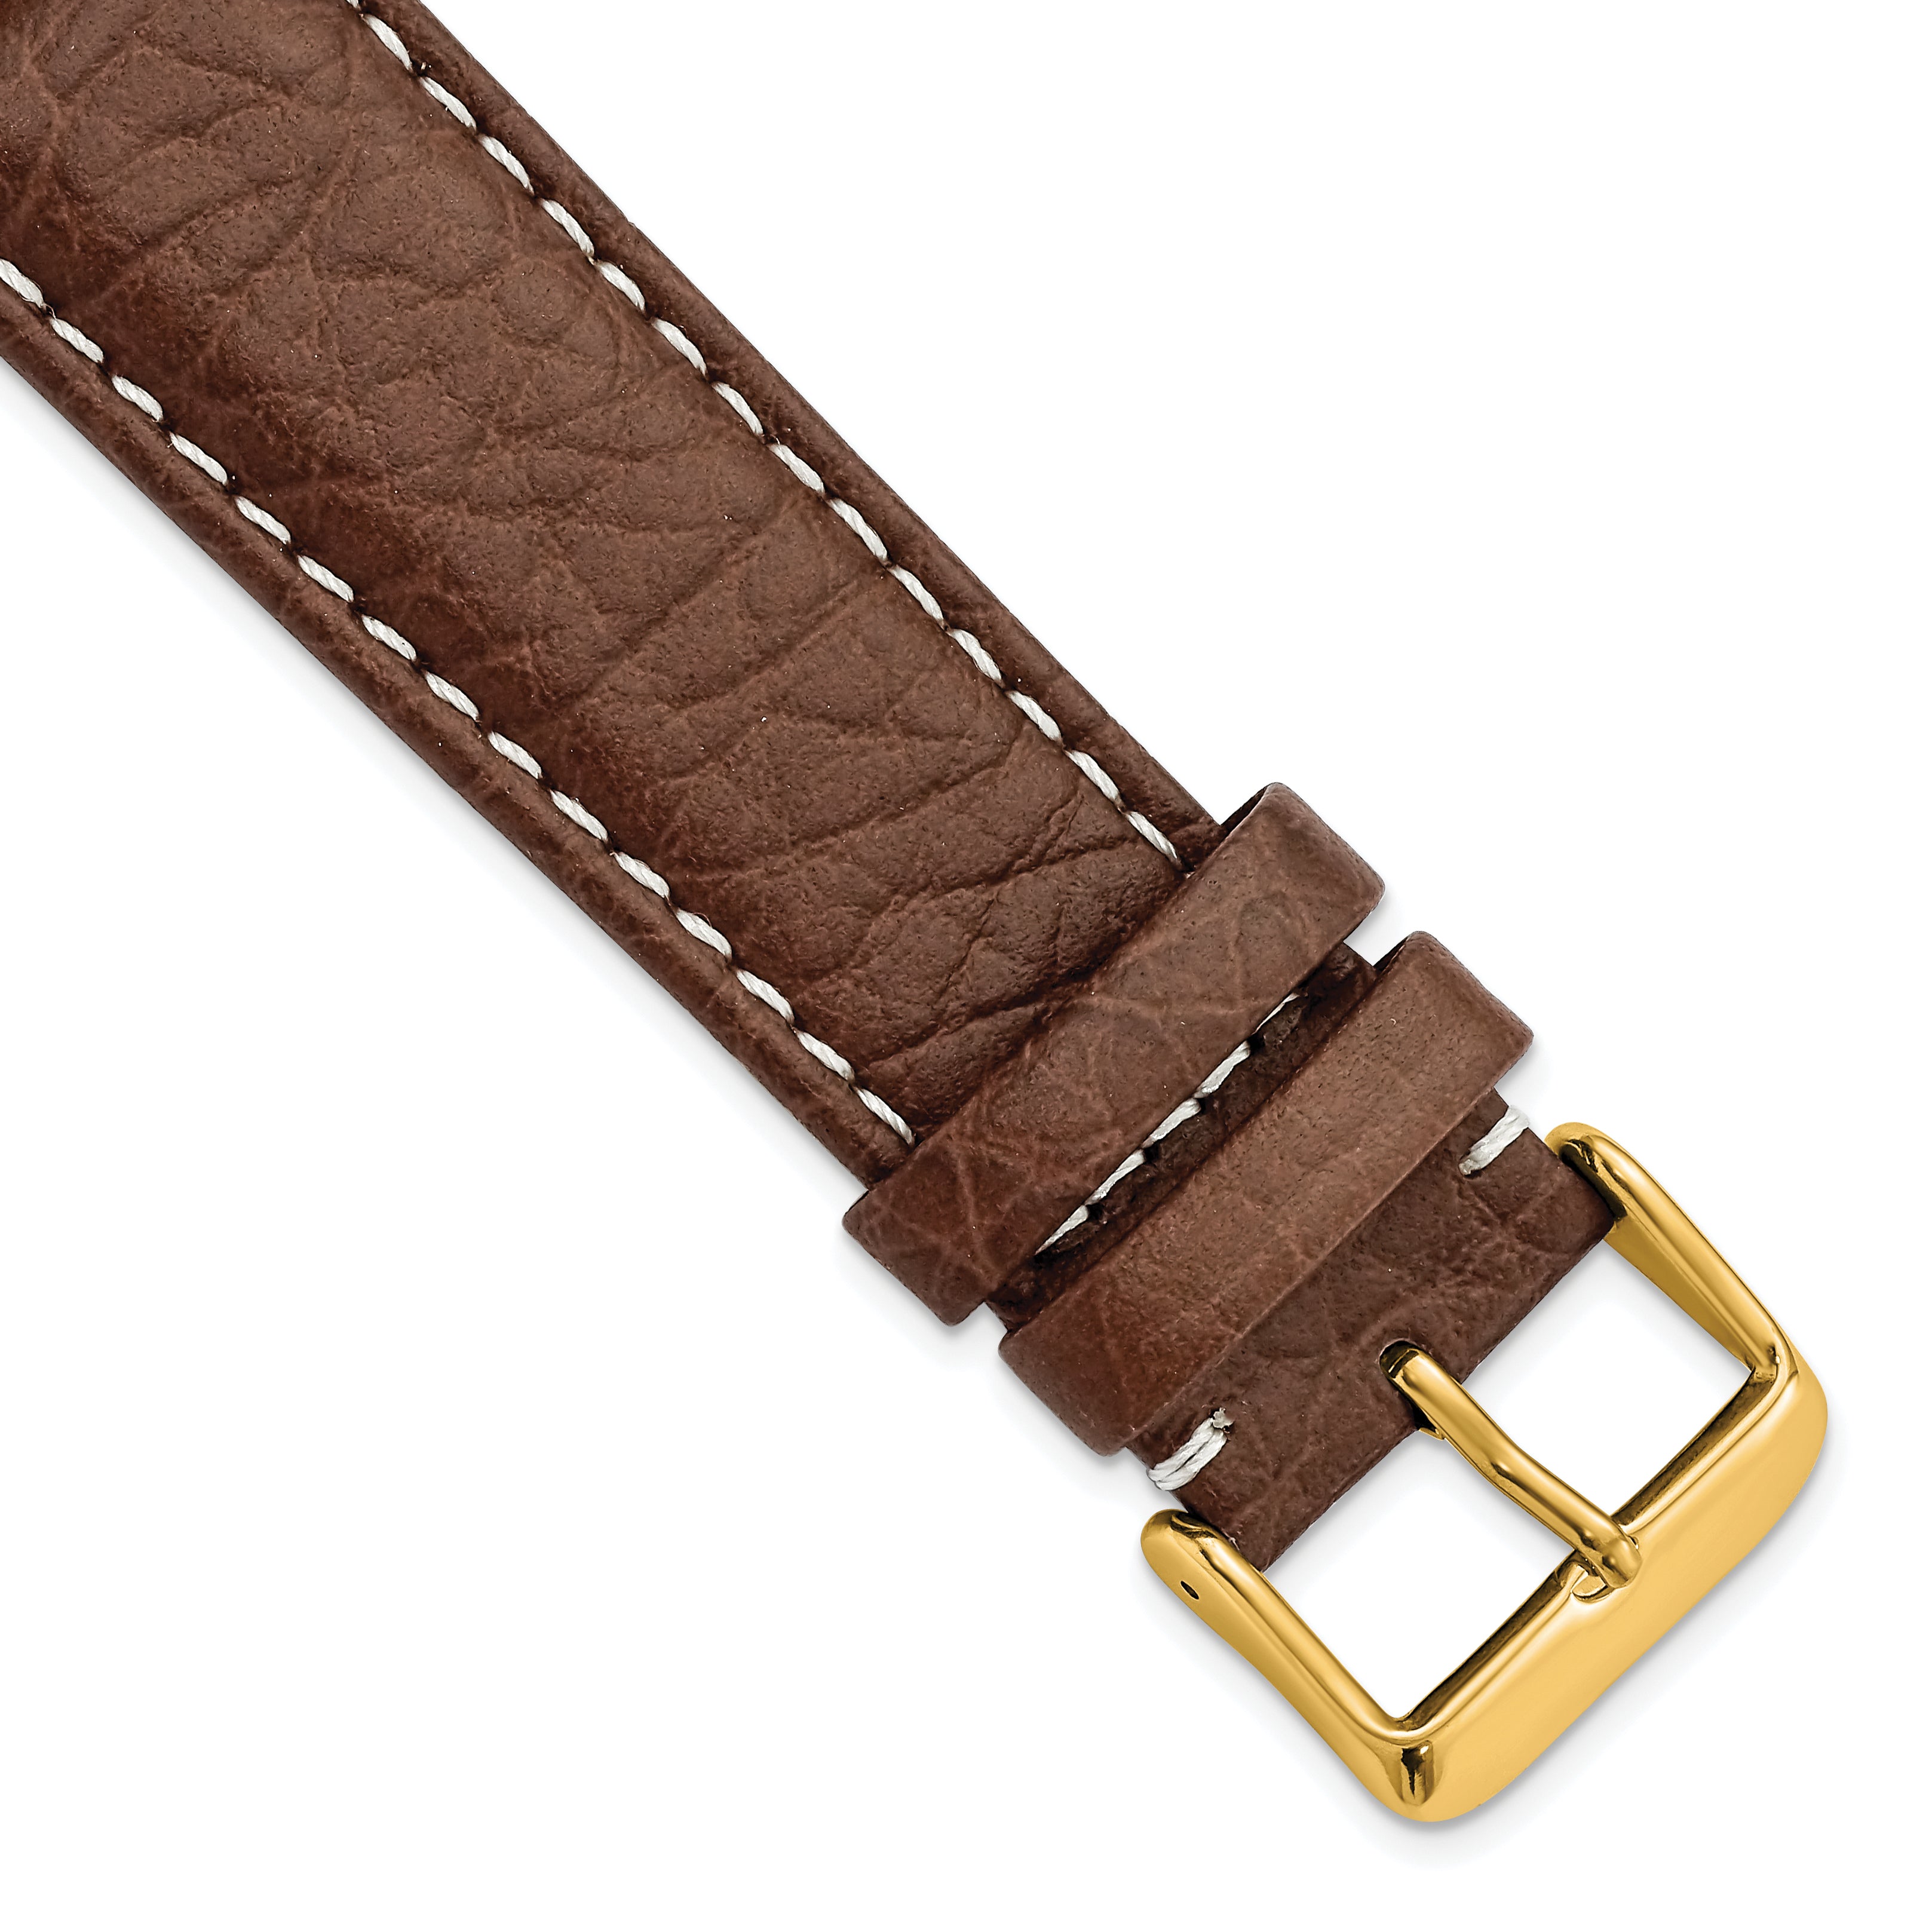 DeBeer 22mm Dark Brown Sport Leather with White Stitching and Gold-tone Buckle 7.5 inch Watch Band